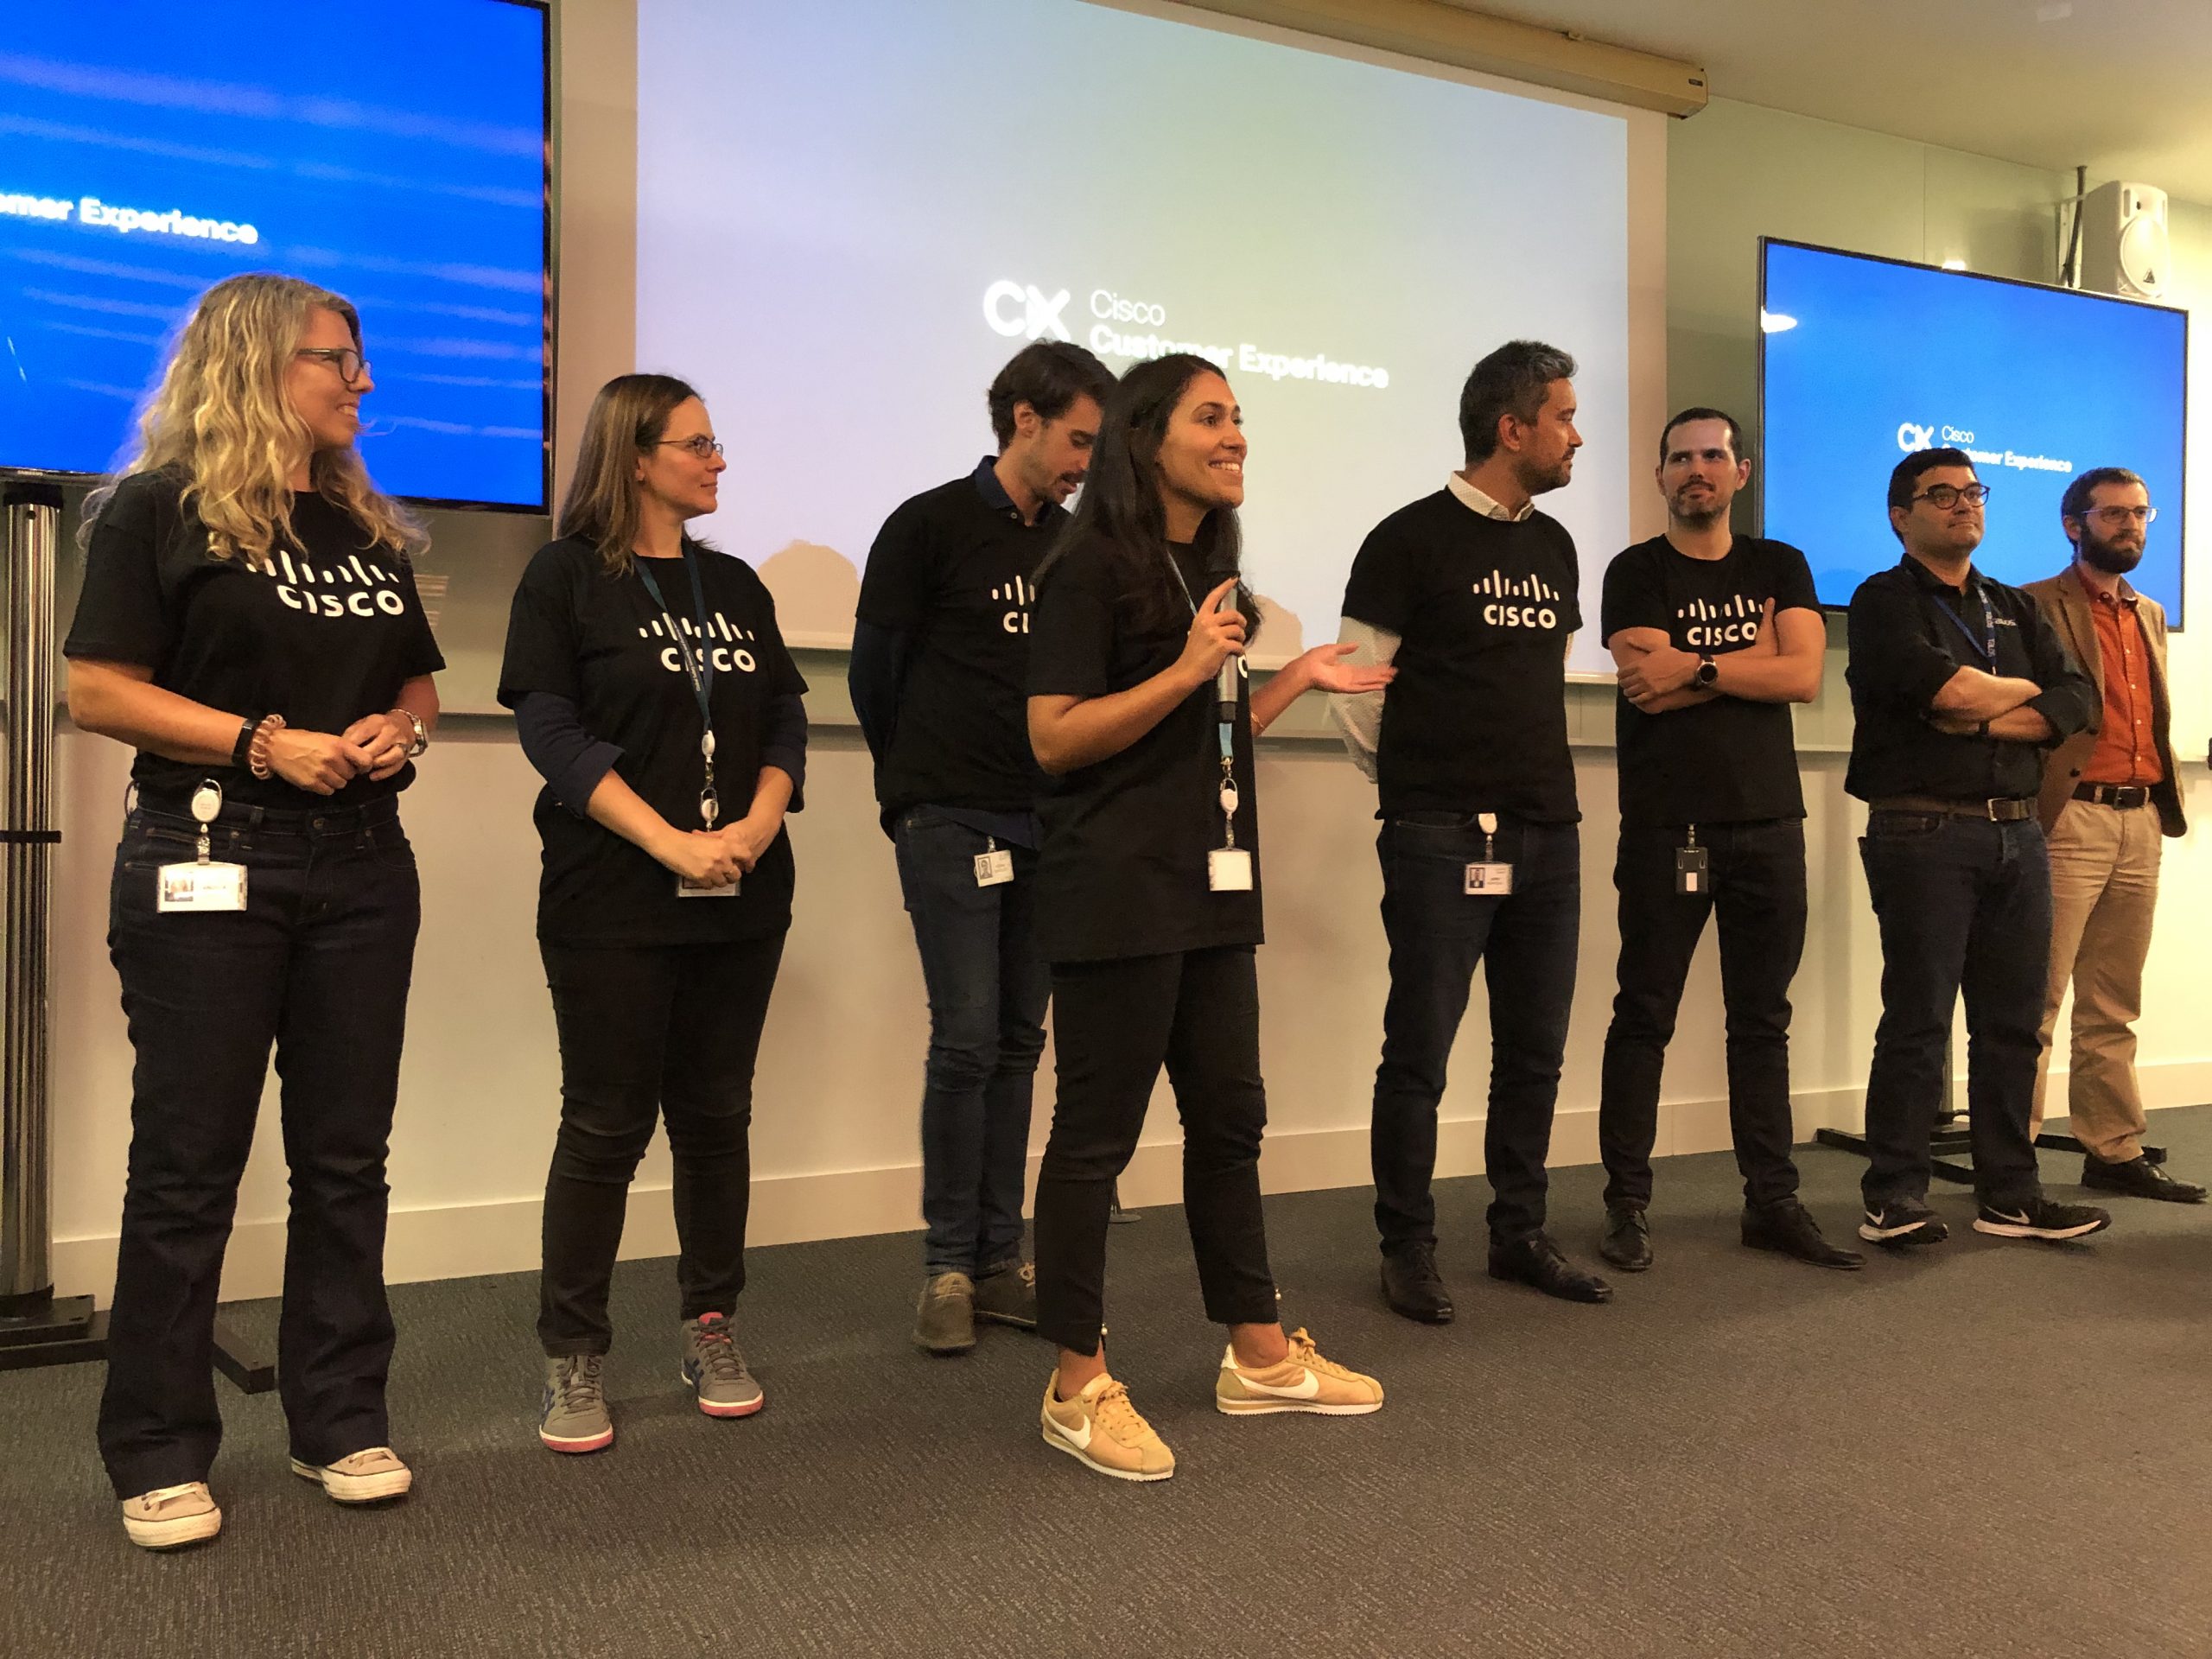 Group wearing Cisco shirts speaks to audience.